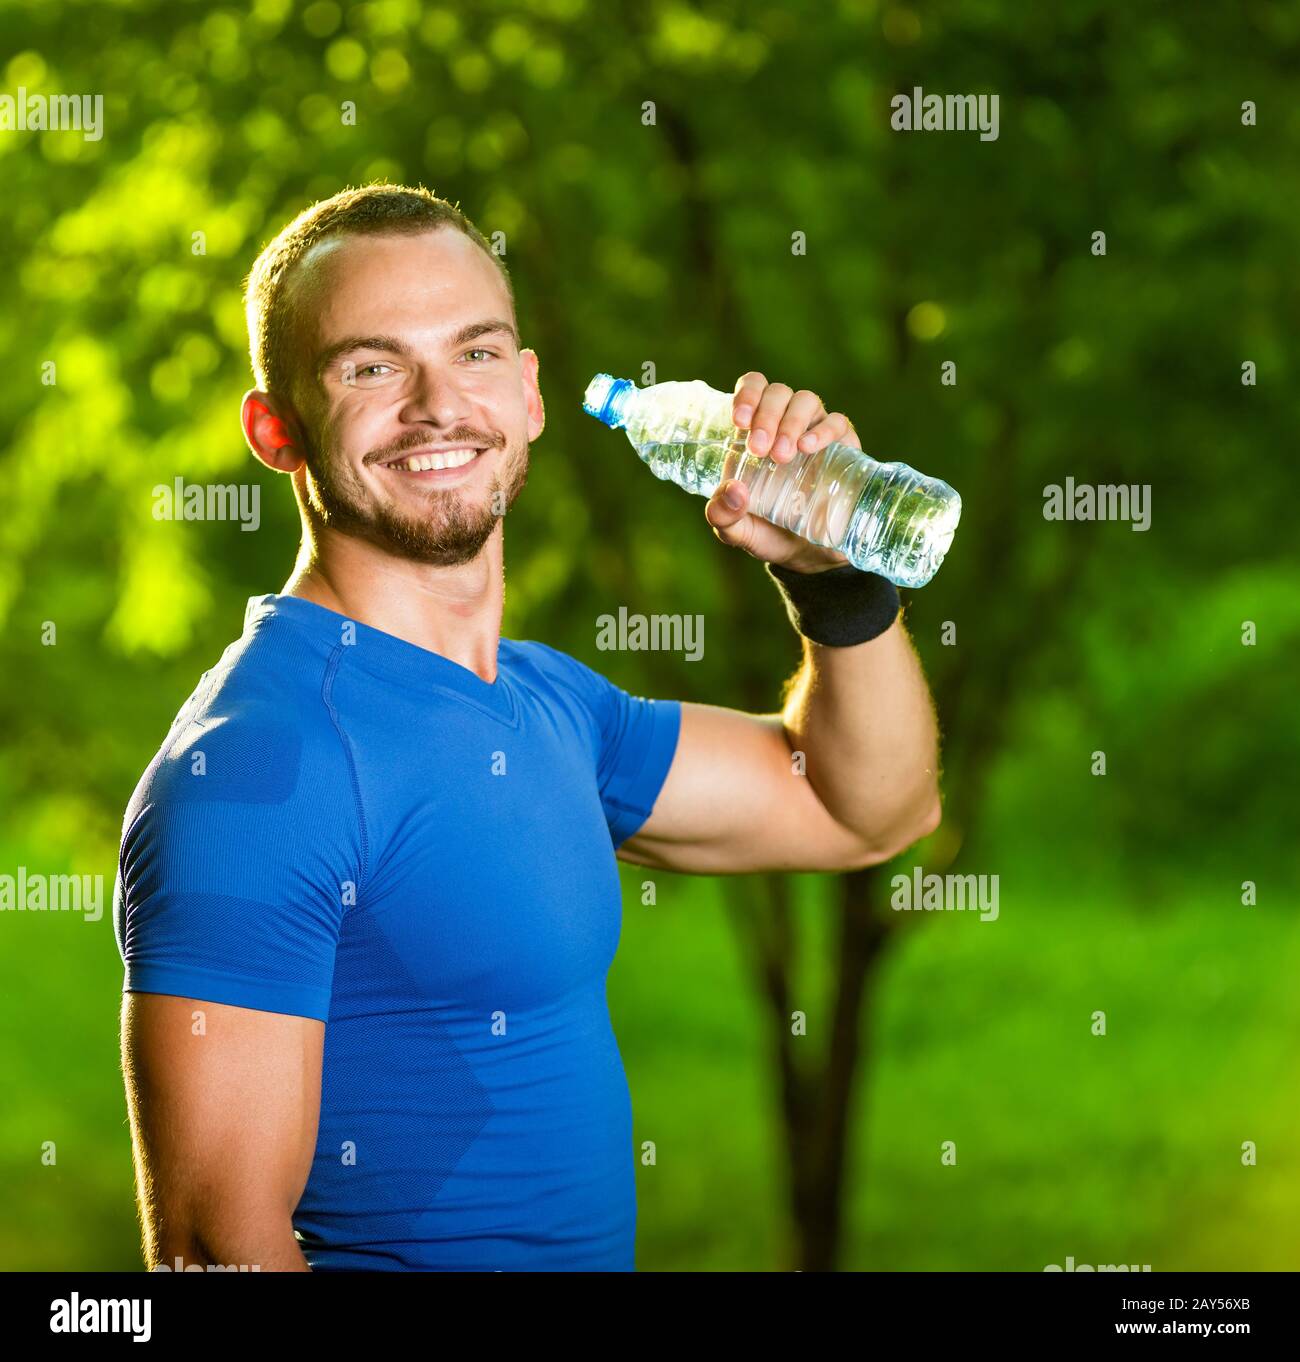 https://c8.alamy.com/comp/2AY56XB/athletic-mature-man-drinking-water-from-a-bottle-2AY56XB.jpg